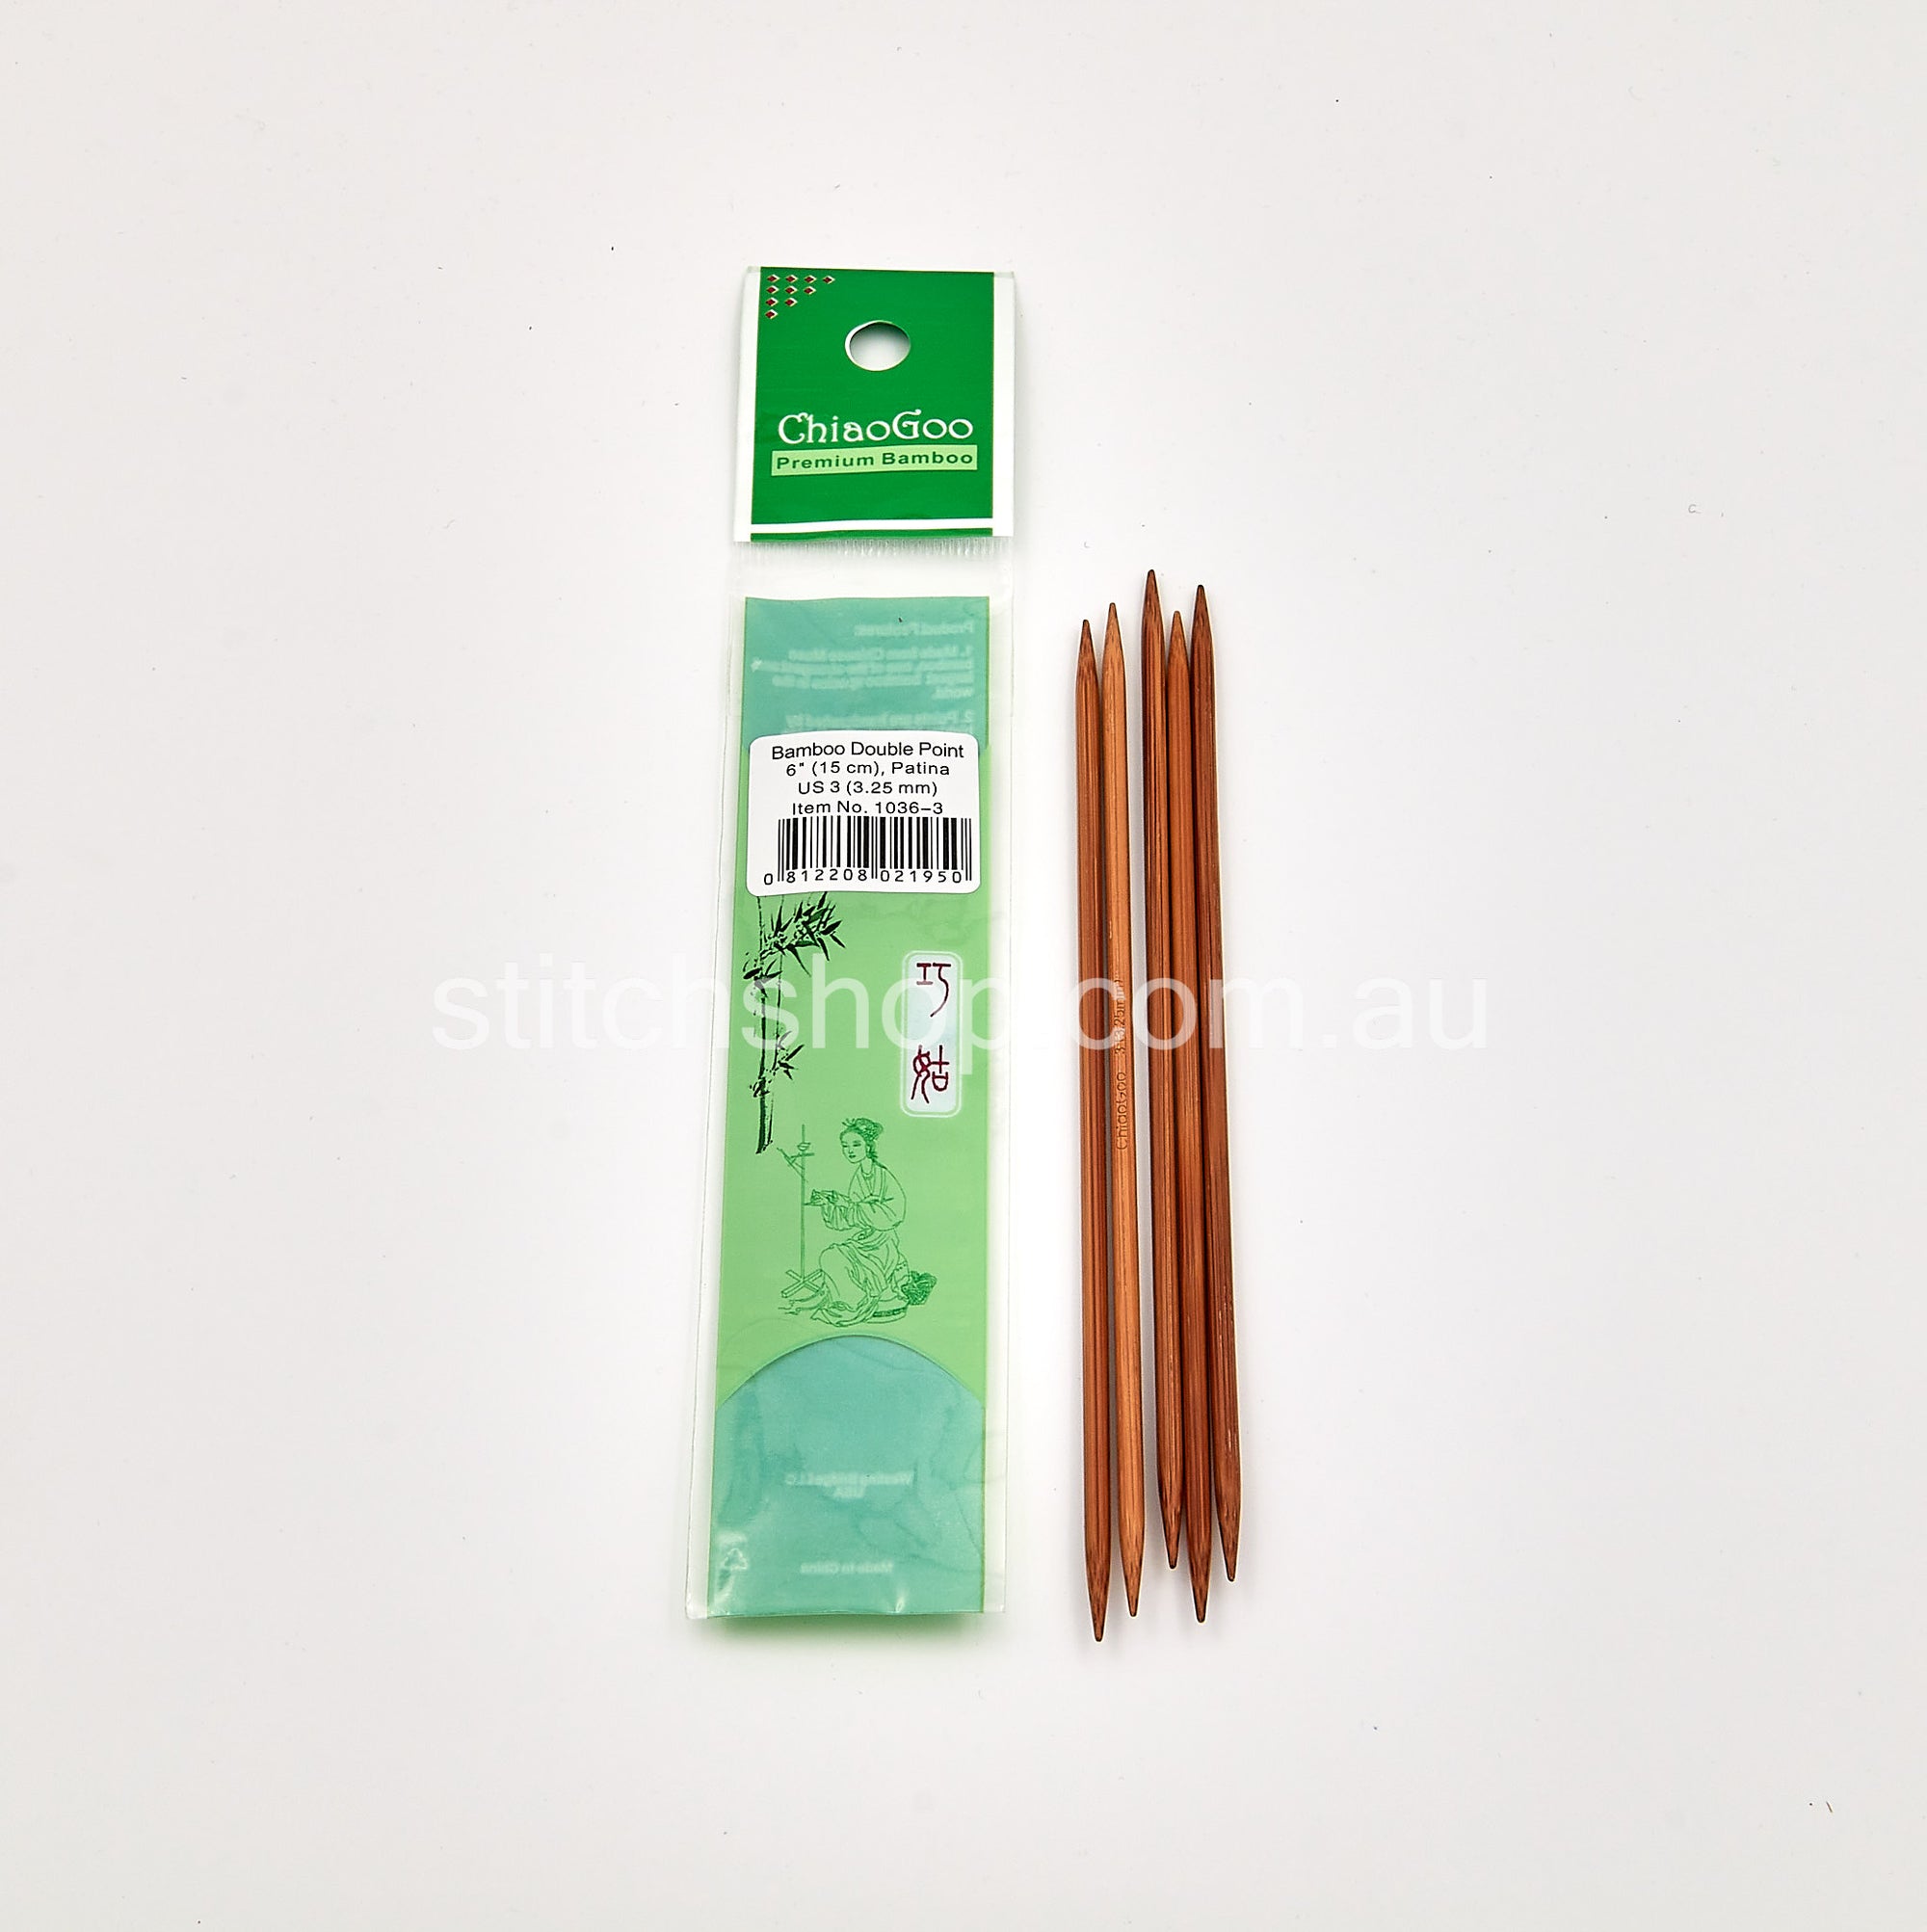 ChiaoGoo Bamboo Double Pointed Needles (15cm) - 3.25mm (0812208021950)